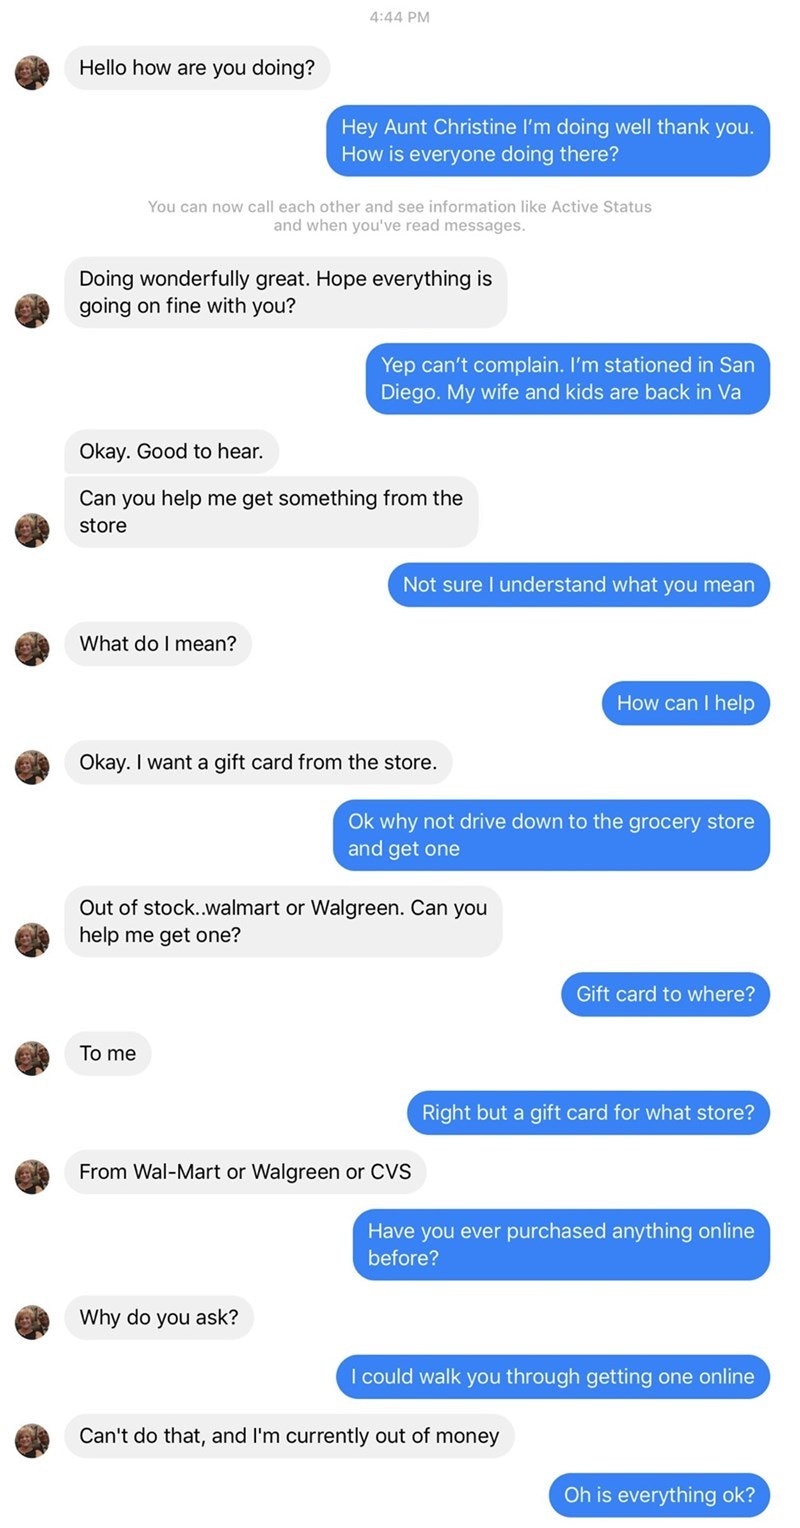 Example of gift card scam